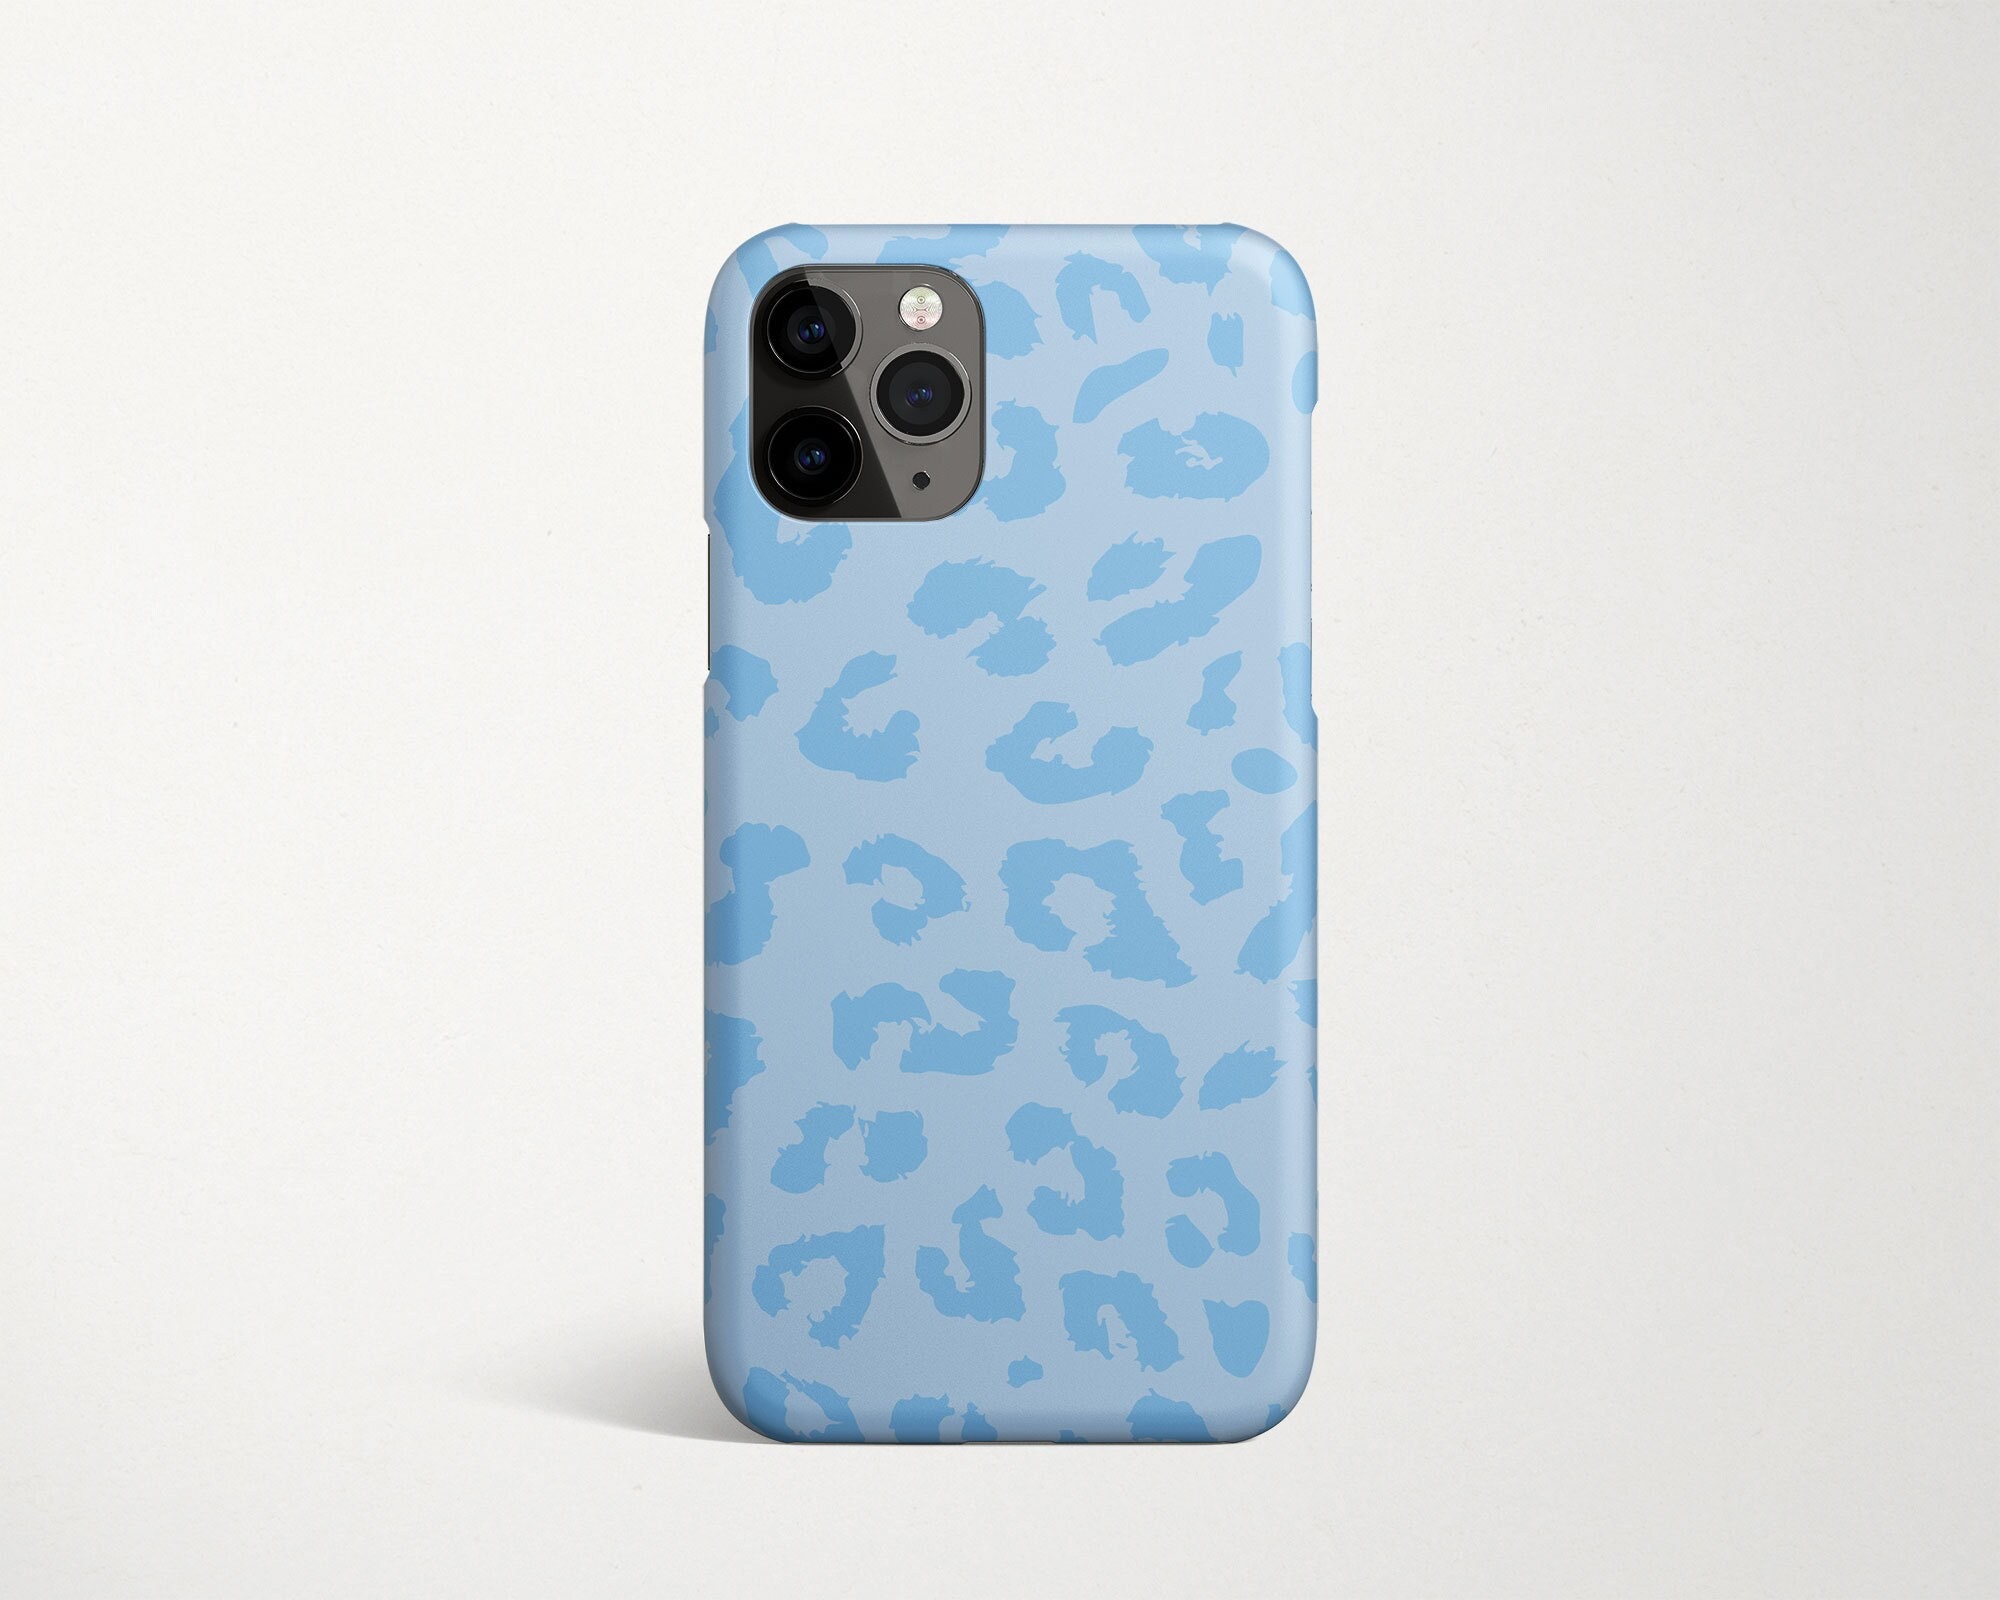 Square Glitter Totem Grid Leopard Phone Case For Samsung S21 S20